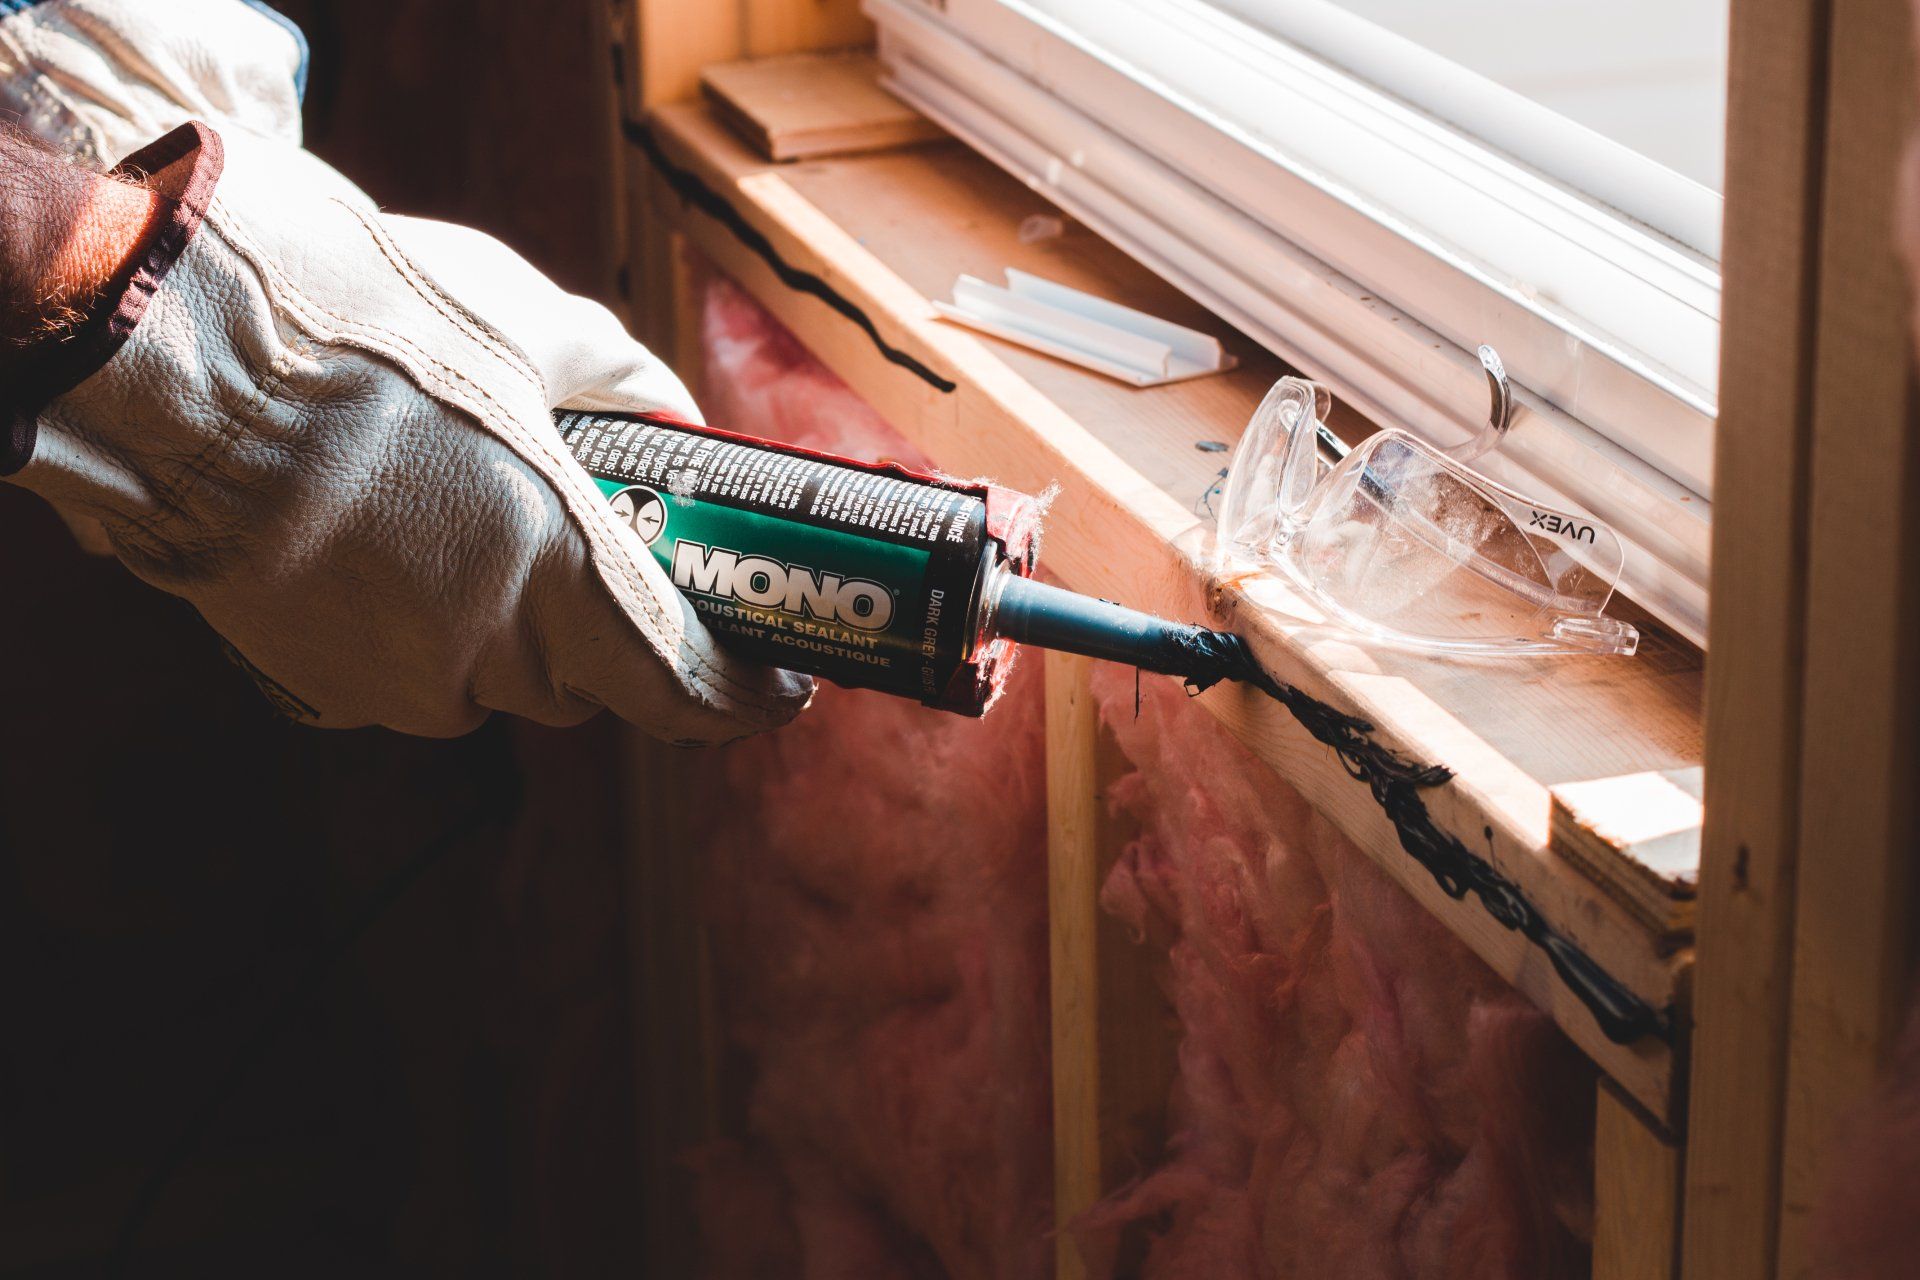 Caulking tips for beginners from Tanguay Homes